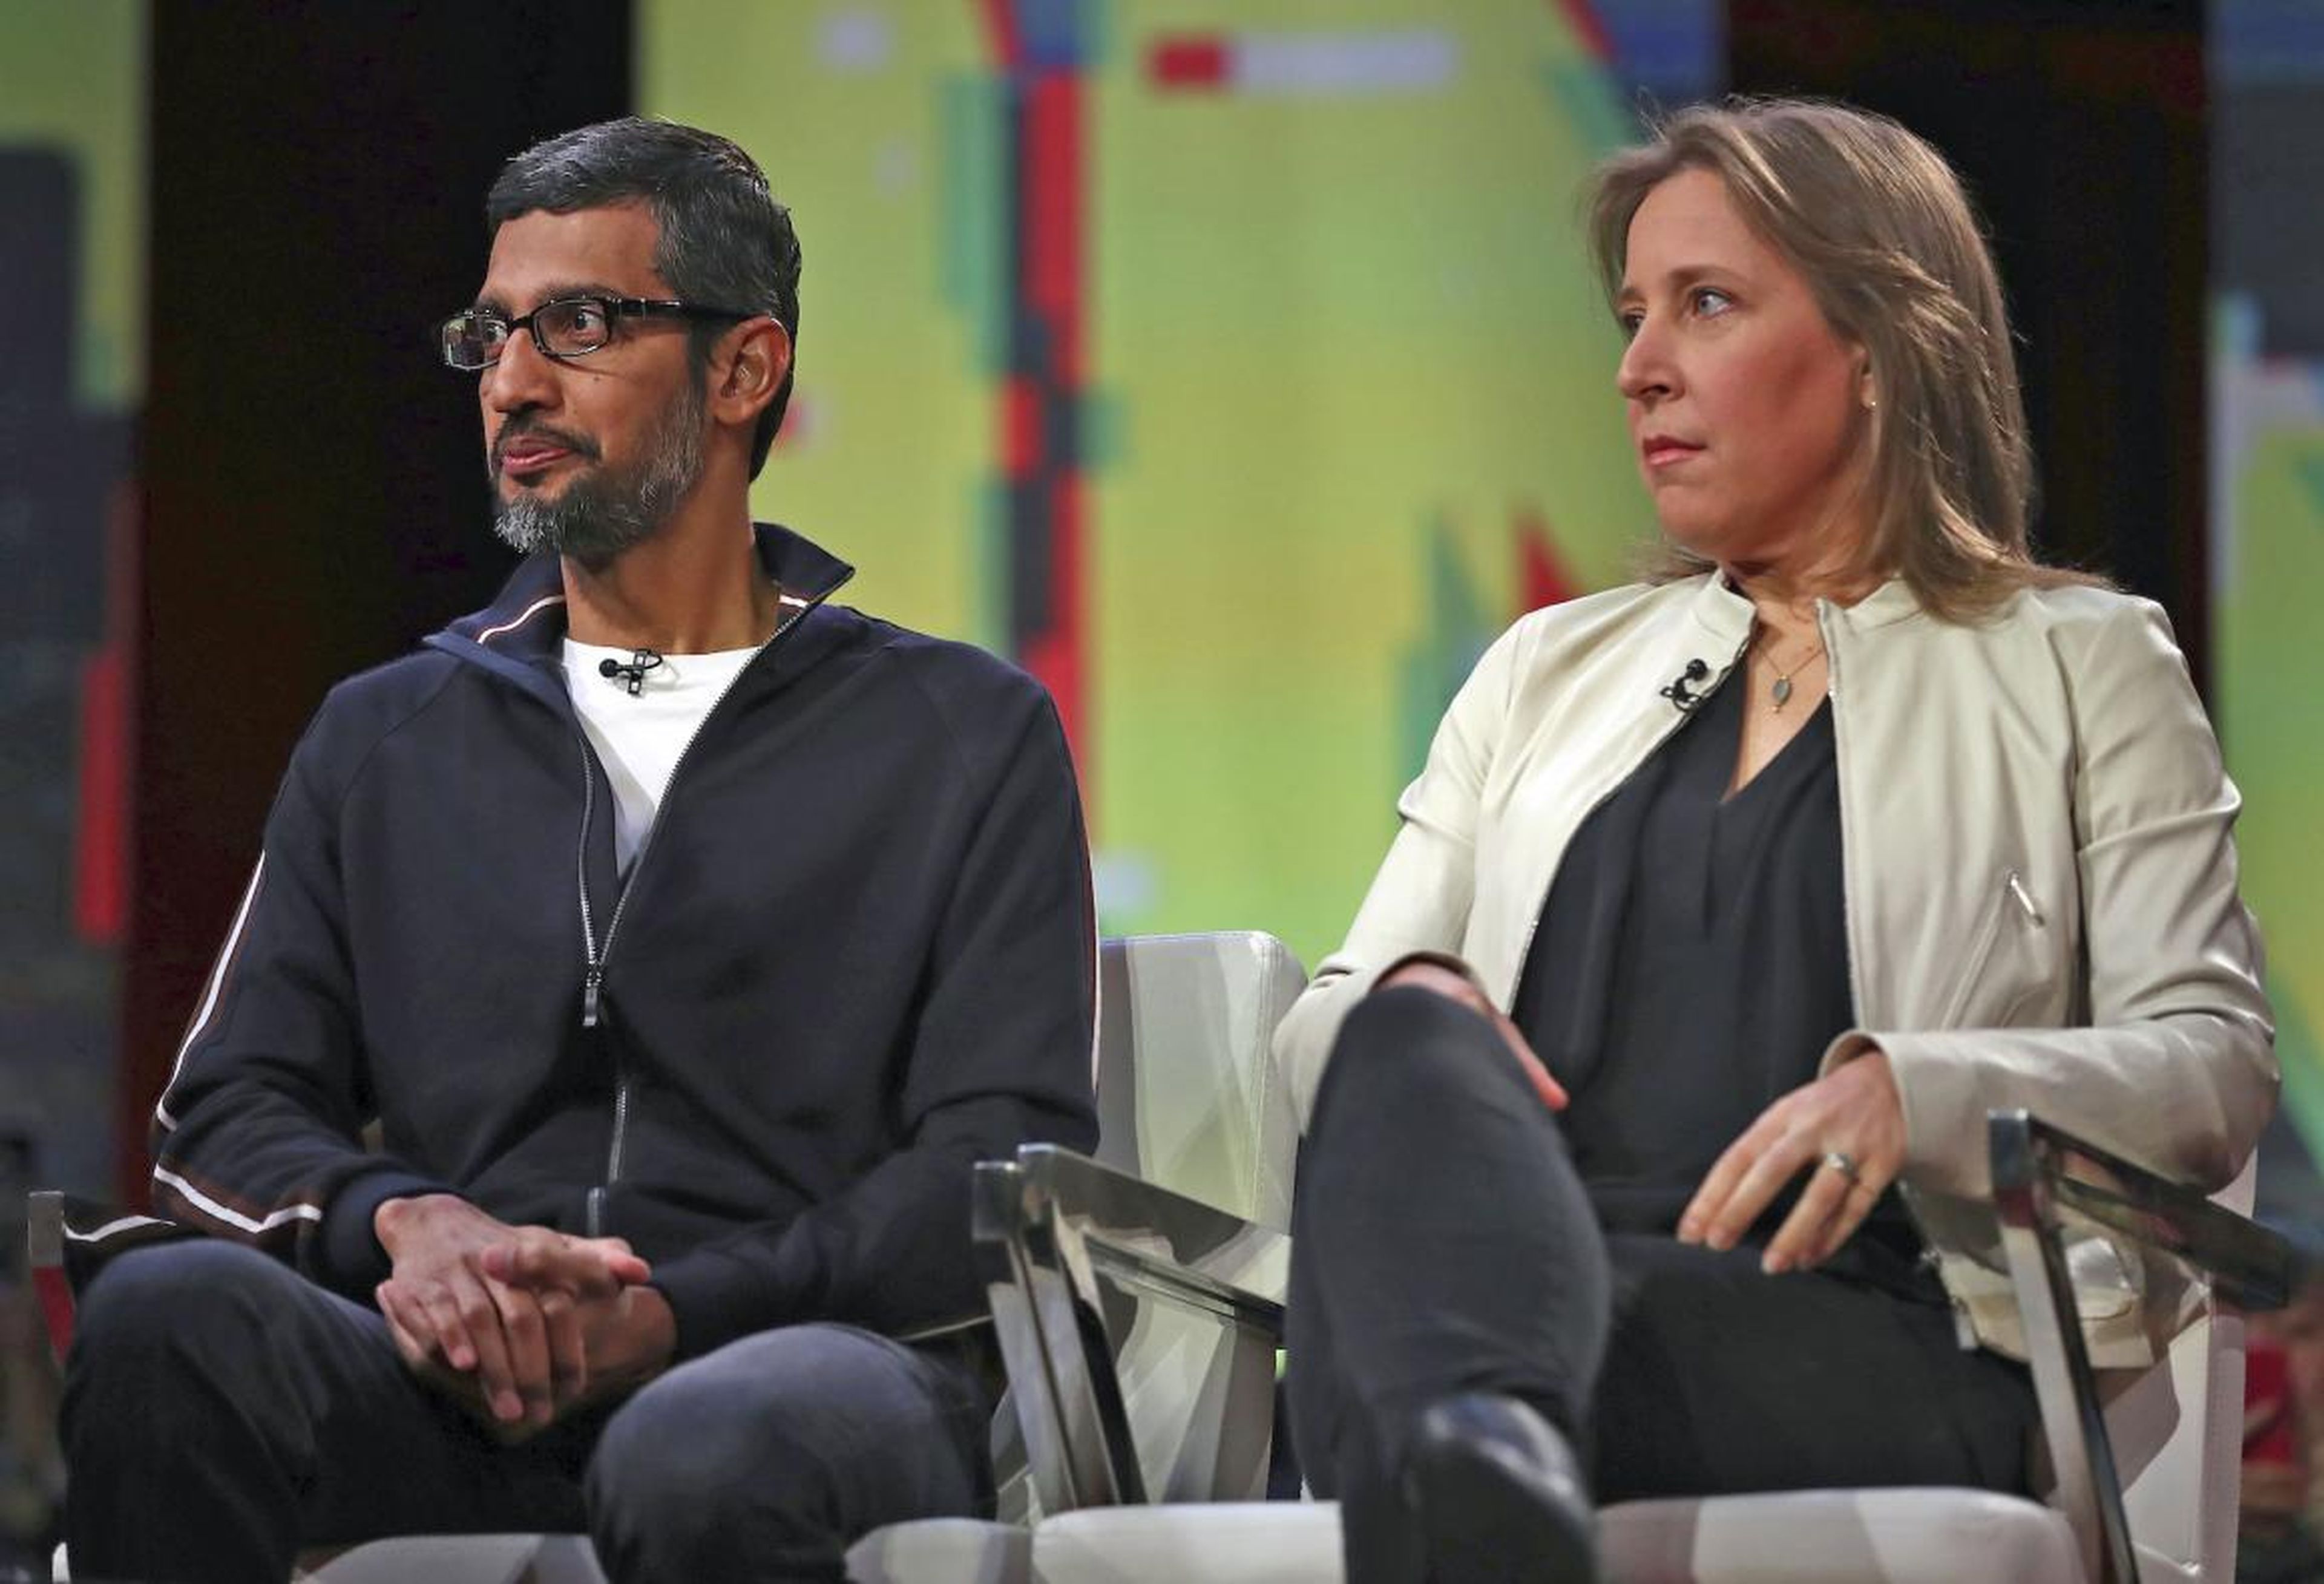 Google CEO Sundar Pichai bowed to Trump during the company's earnings call — here's why that should concern you